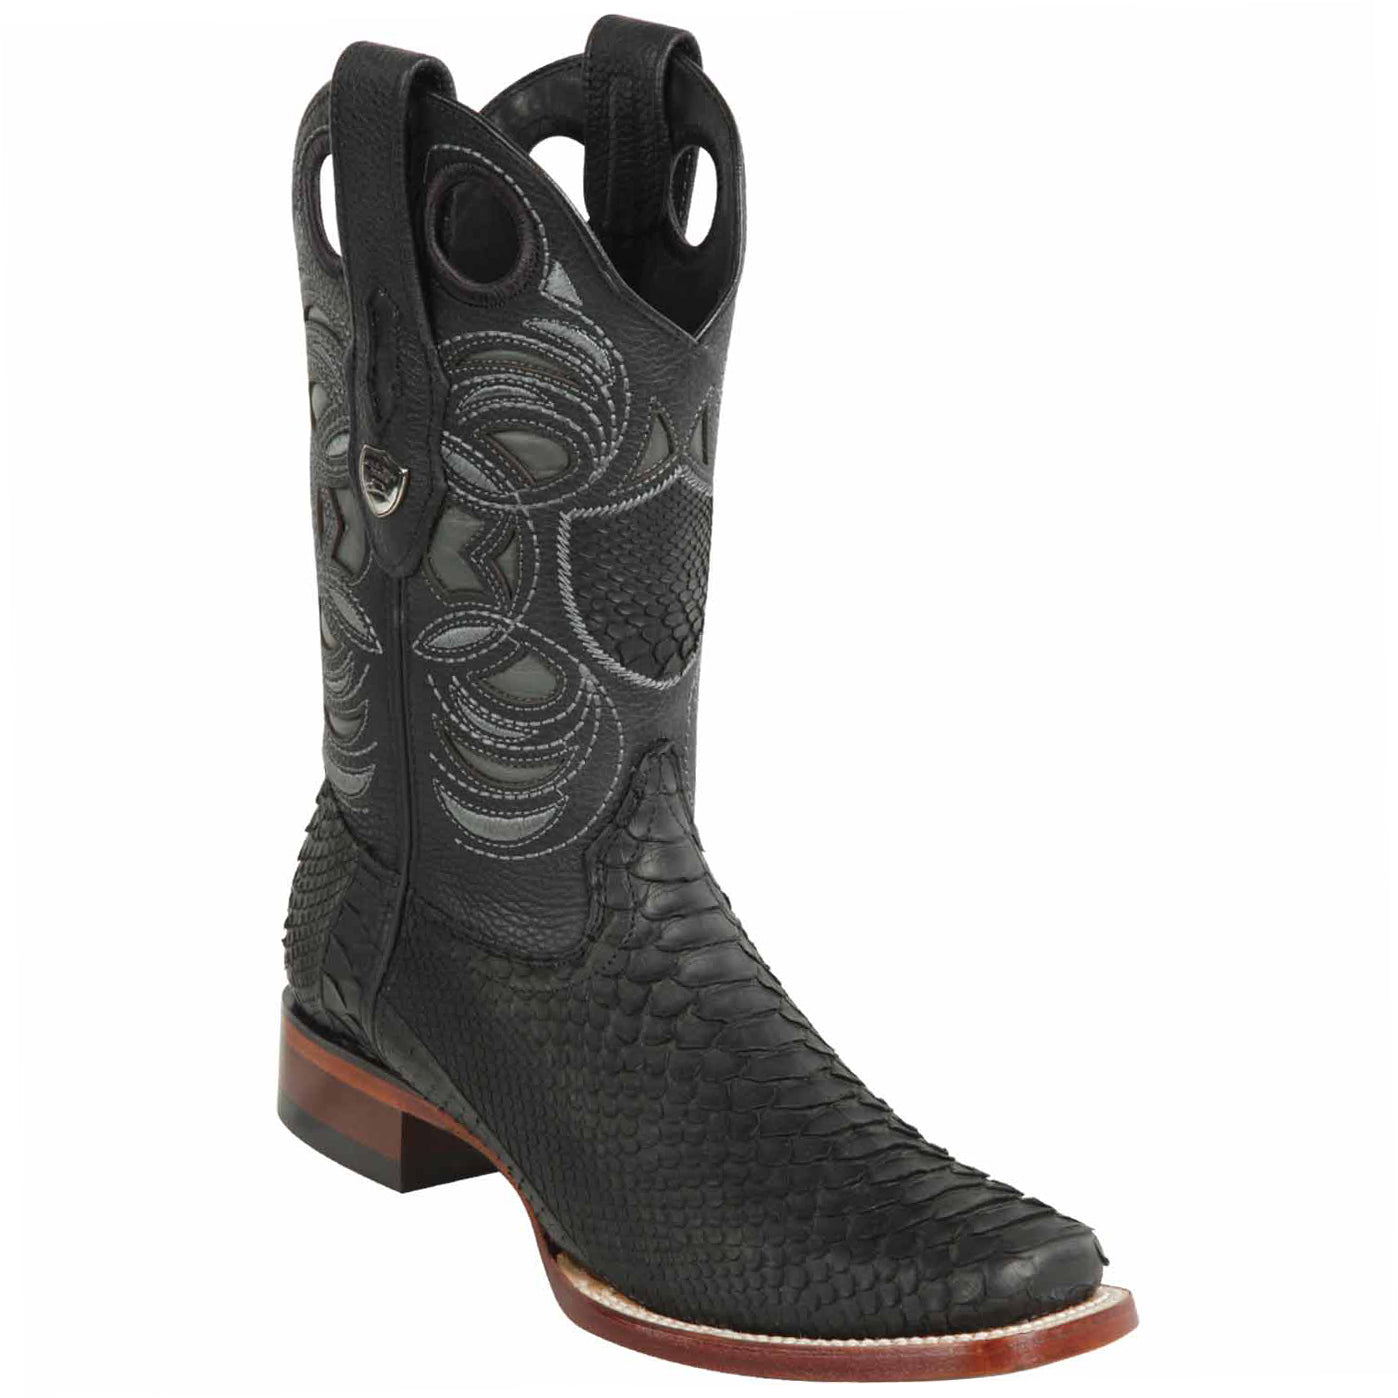 Mens Boots Snakeskin Black Square Toe - Wild West Boots